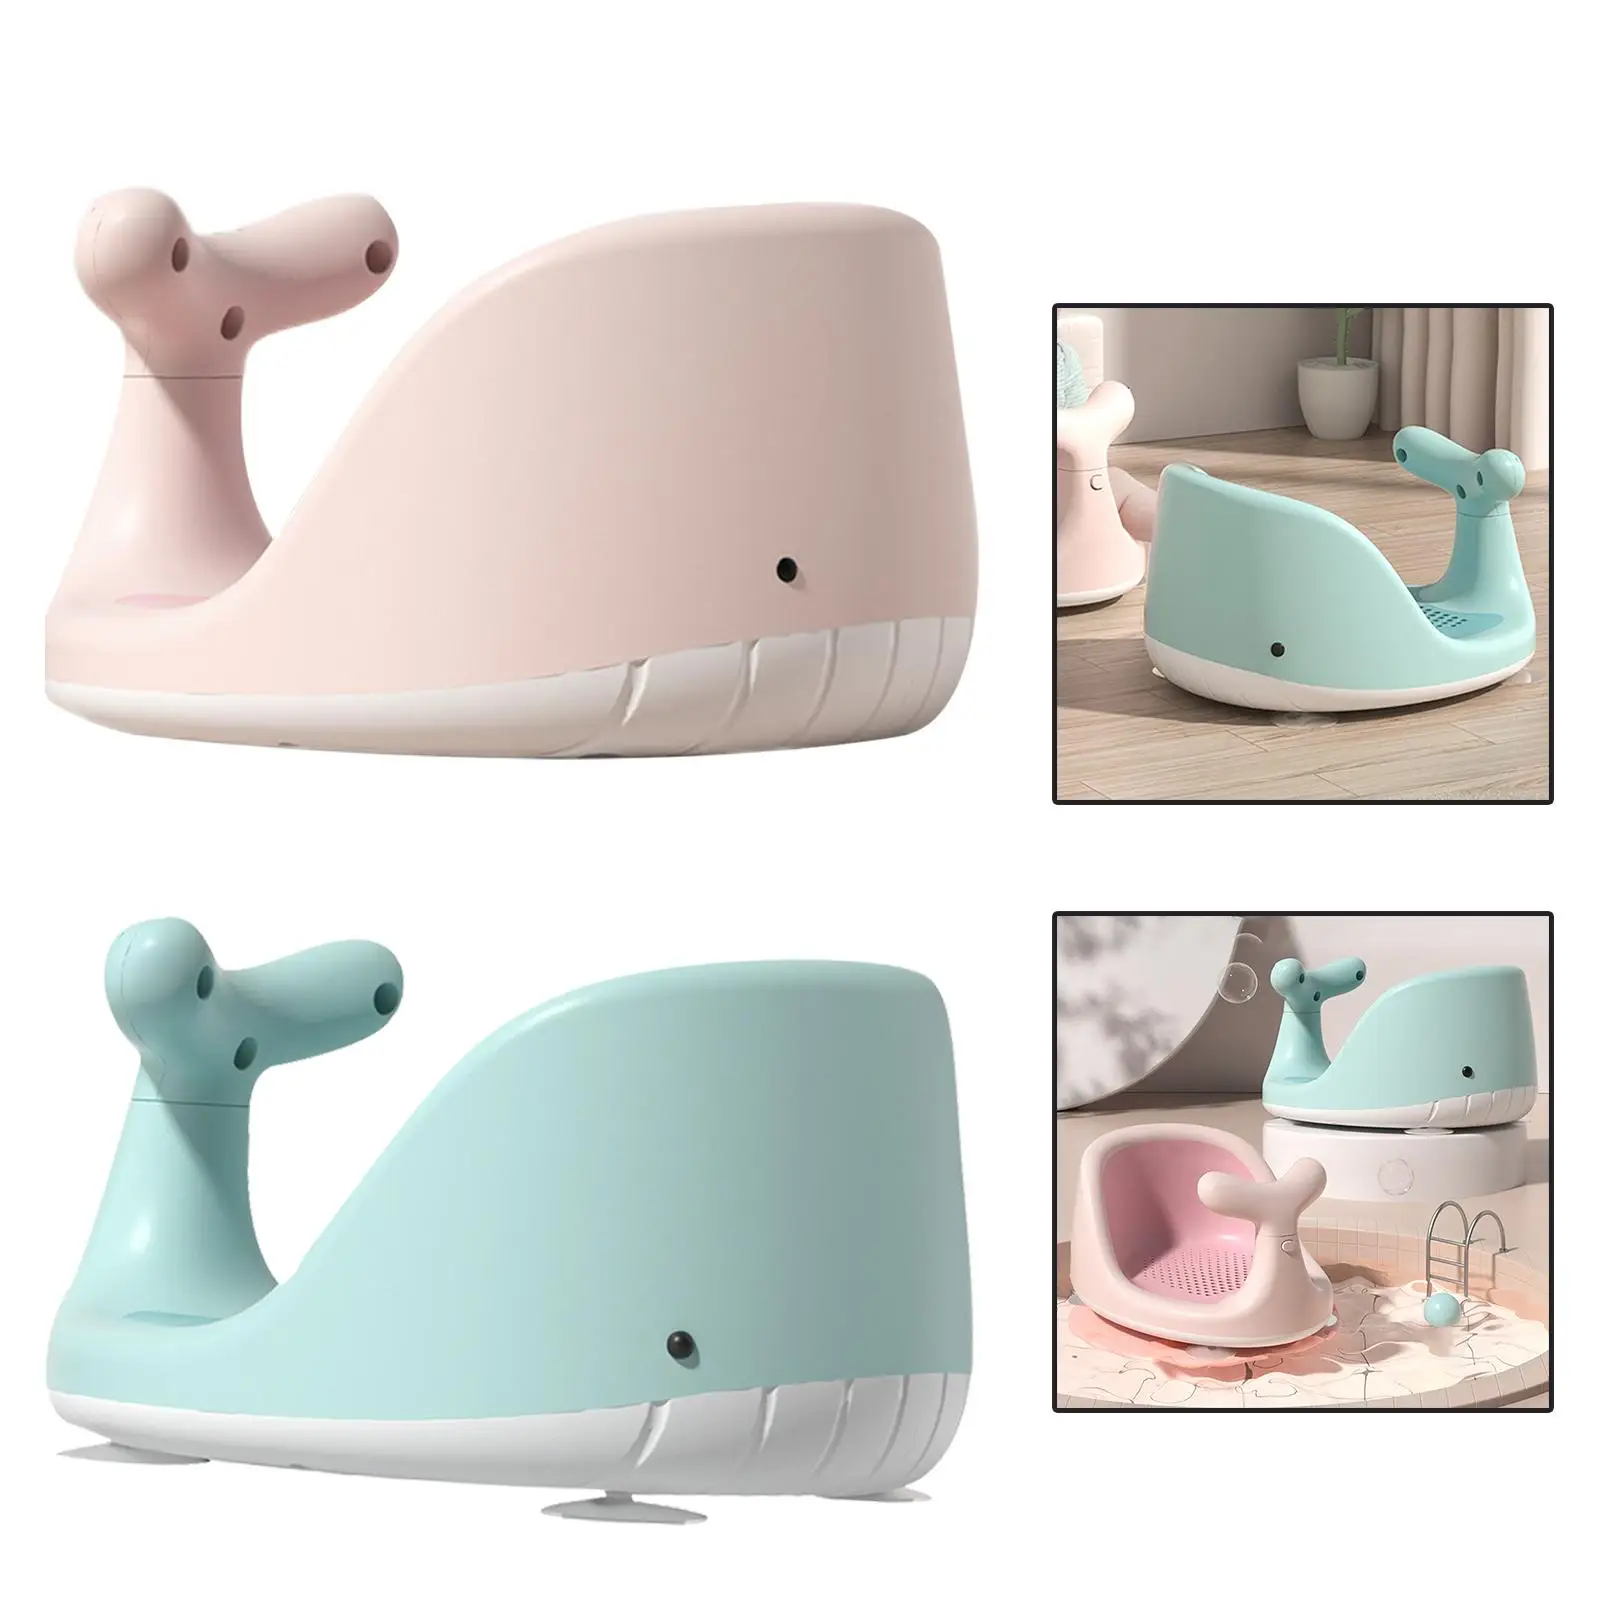 Non Slip Baby Suction Cup Bath Seat Breathable Hole seat pads for 6-18 Months